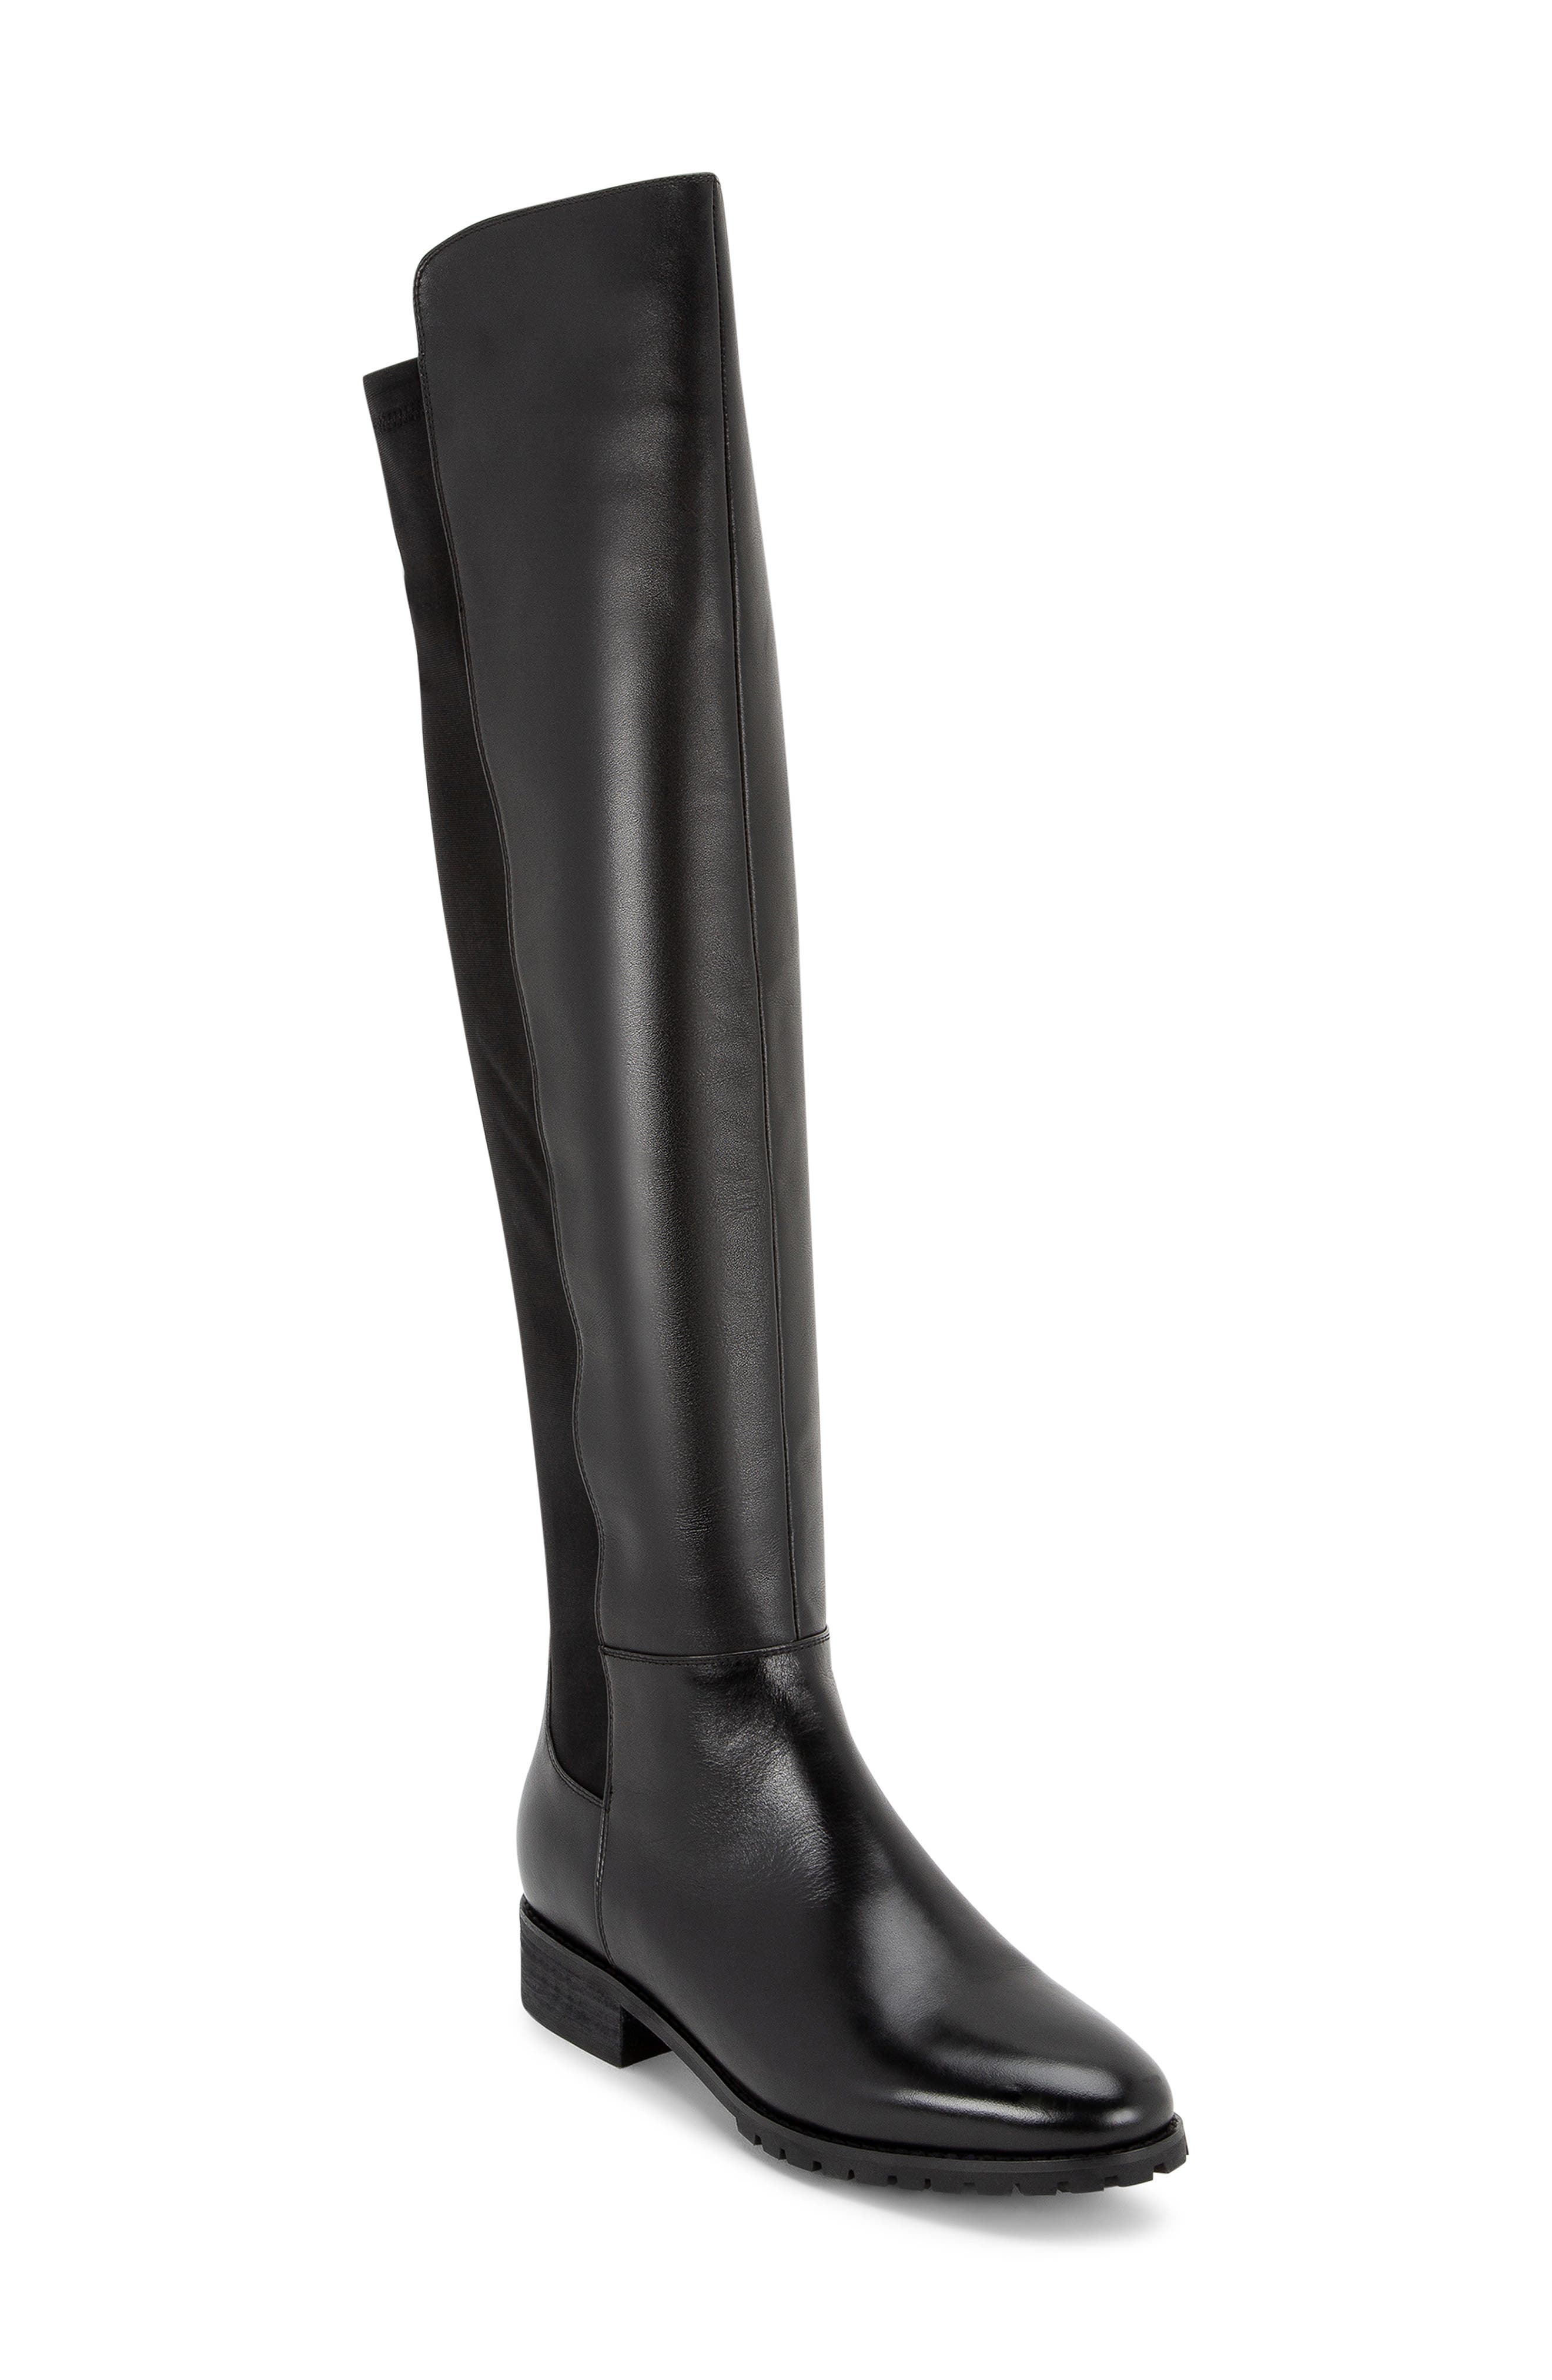 leather waterproof knee high boots